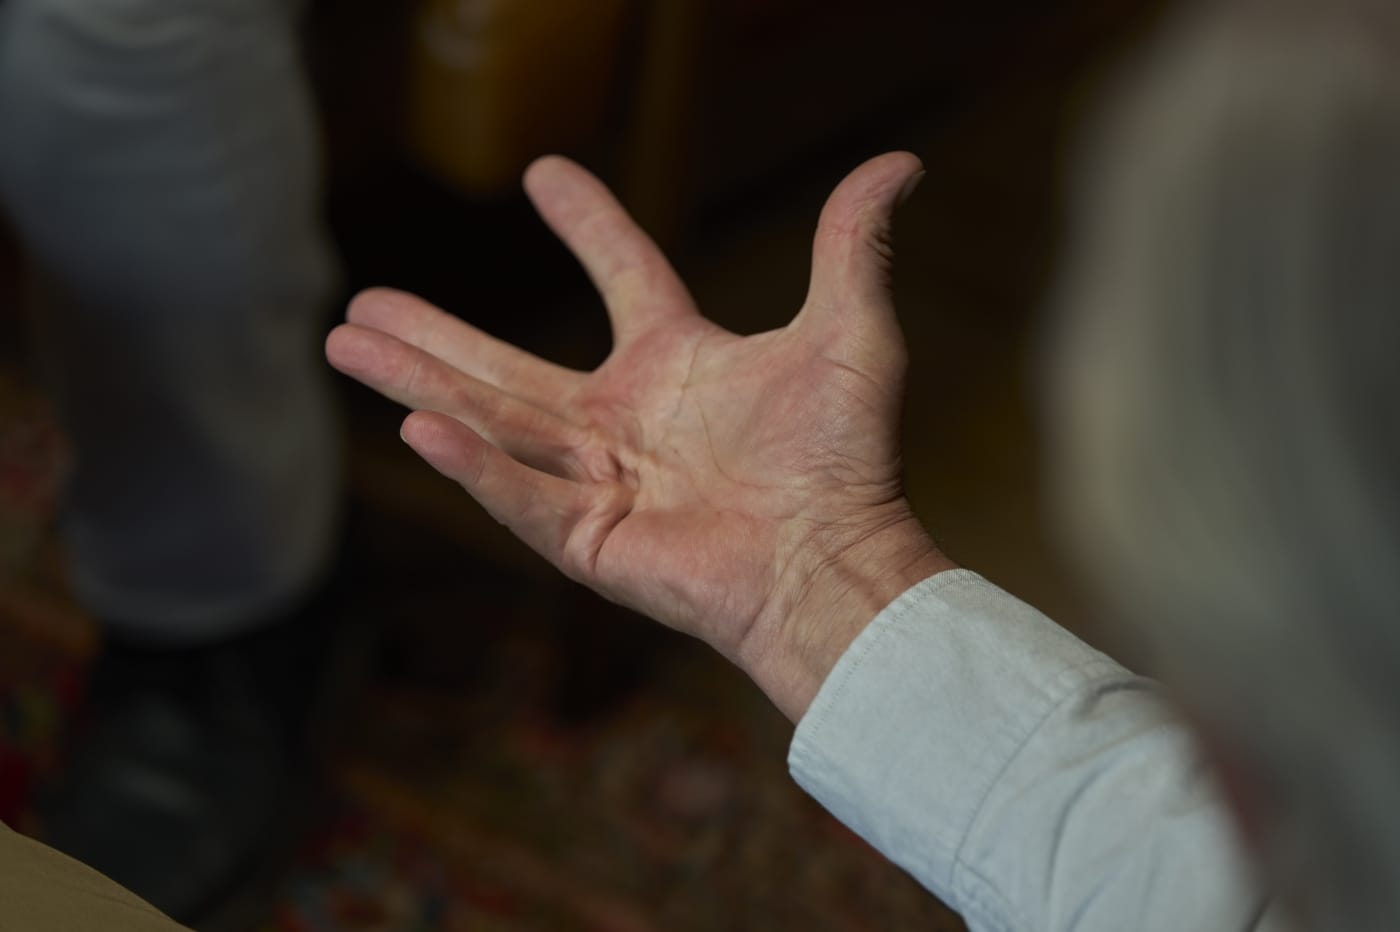 Dupuytren’s contracture patient with open palm